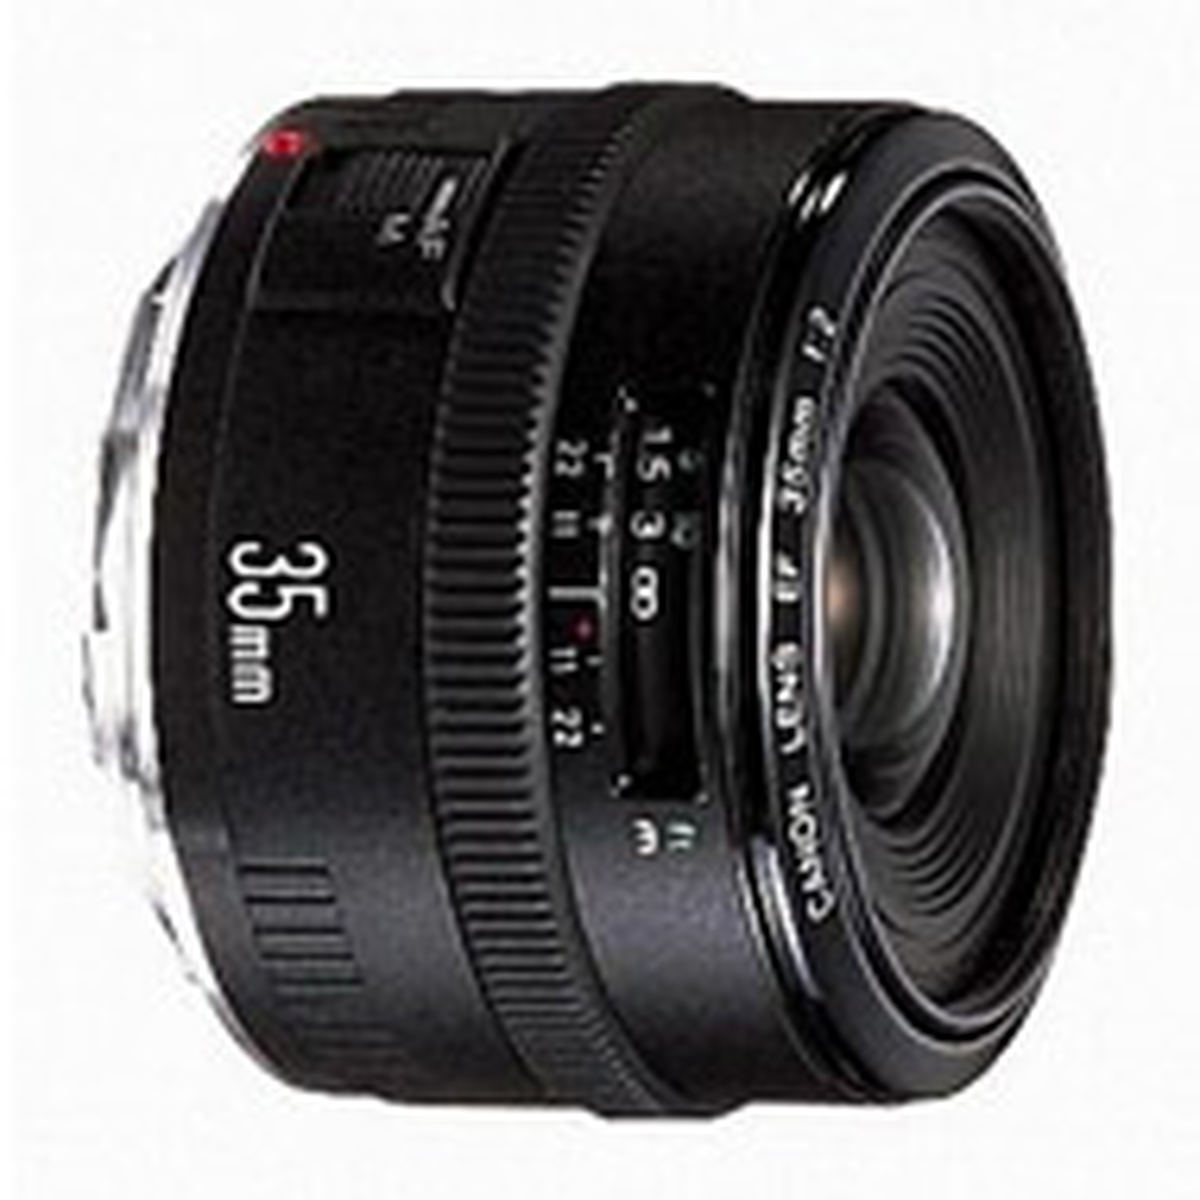 Canon EF 35mm f/2.0 : Specifications and Opinions | JuzaPhoto